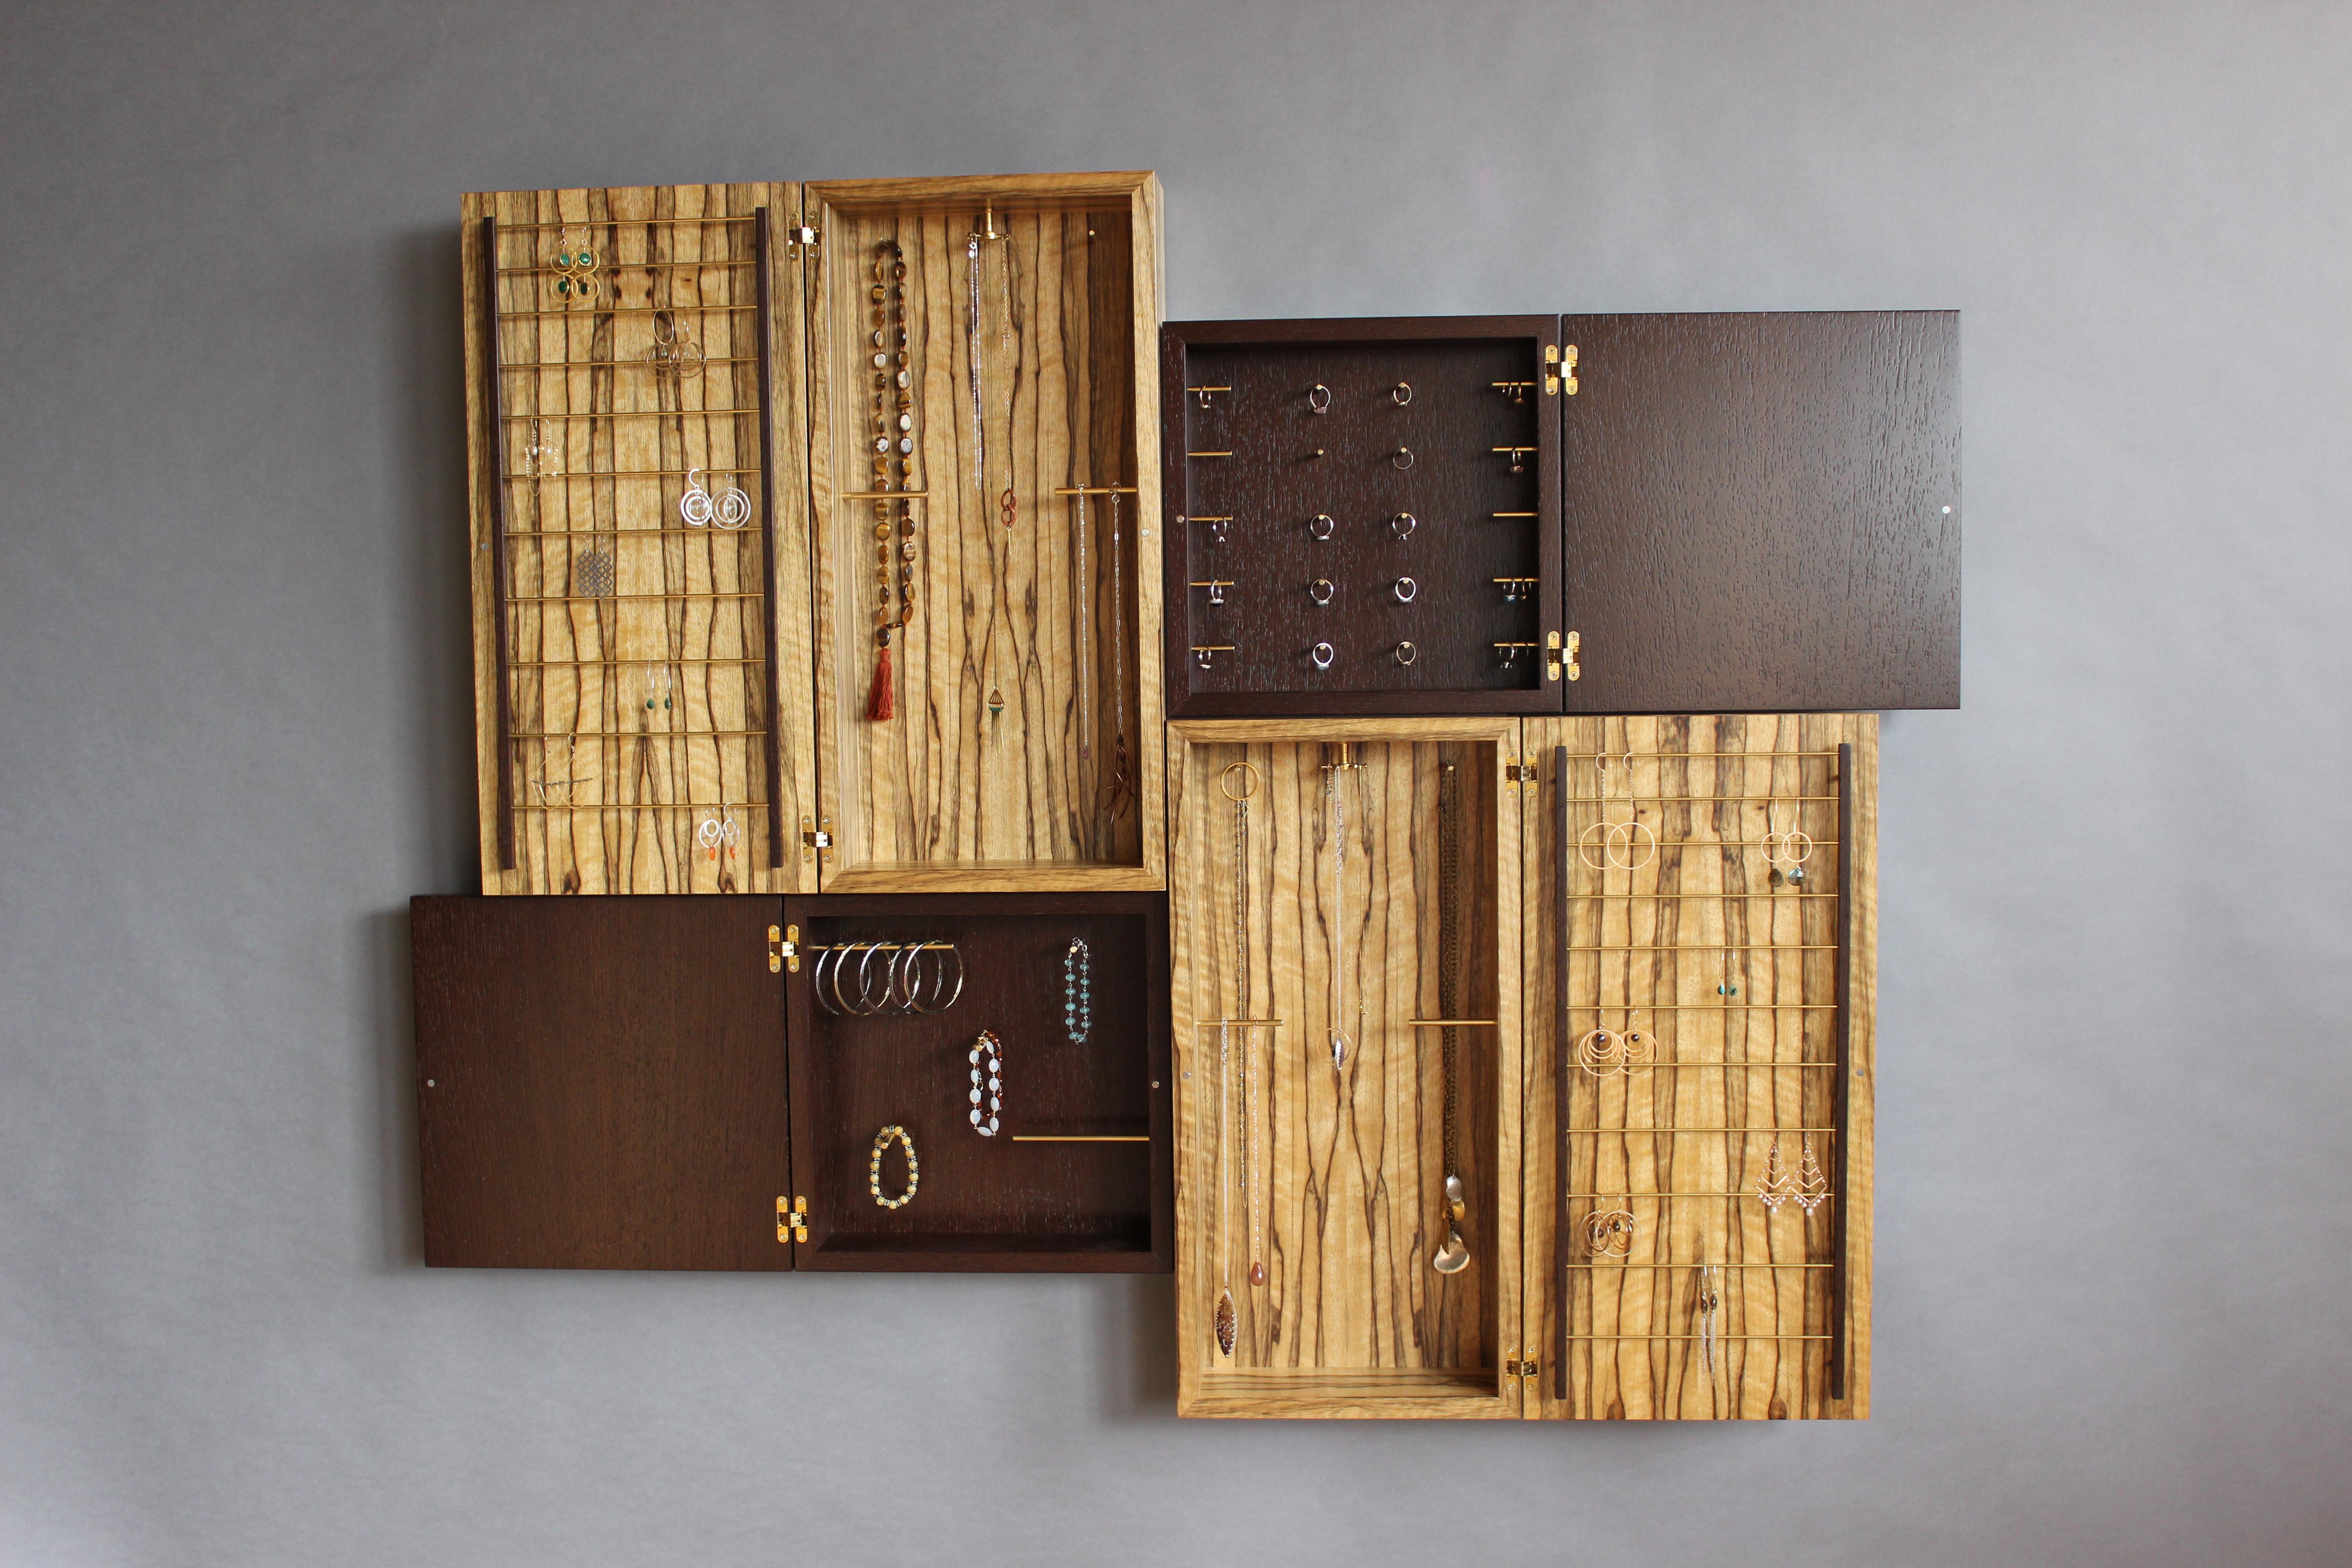 The Tetris Jewelry Case collection is an exploration into the connections between form & intrigue. At first glance they appear as a stunning wall piece, subtly inviting a closer study. Upon doing so one finds doors held shut by a tiny magnet, easily